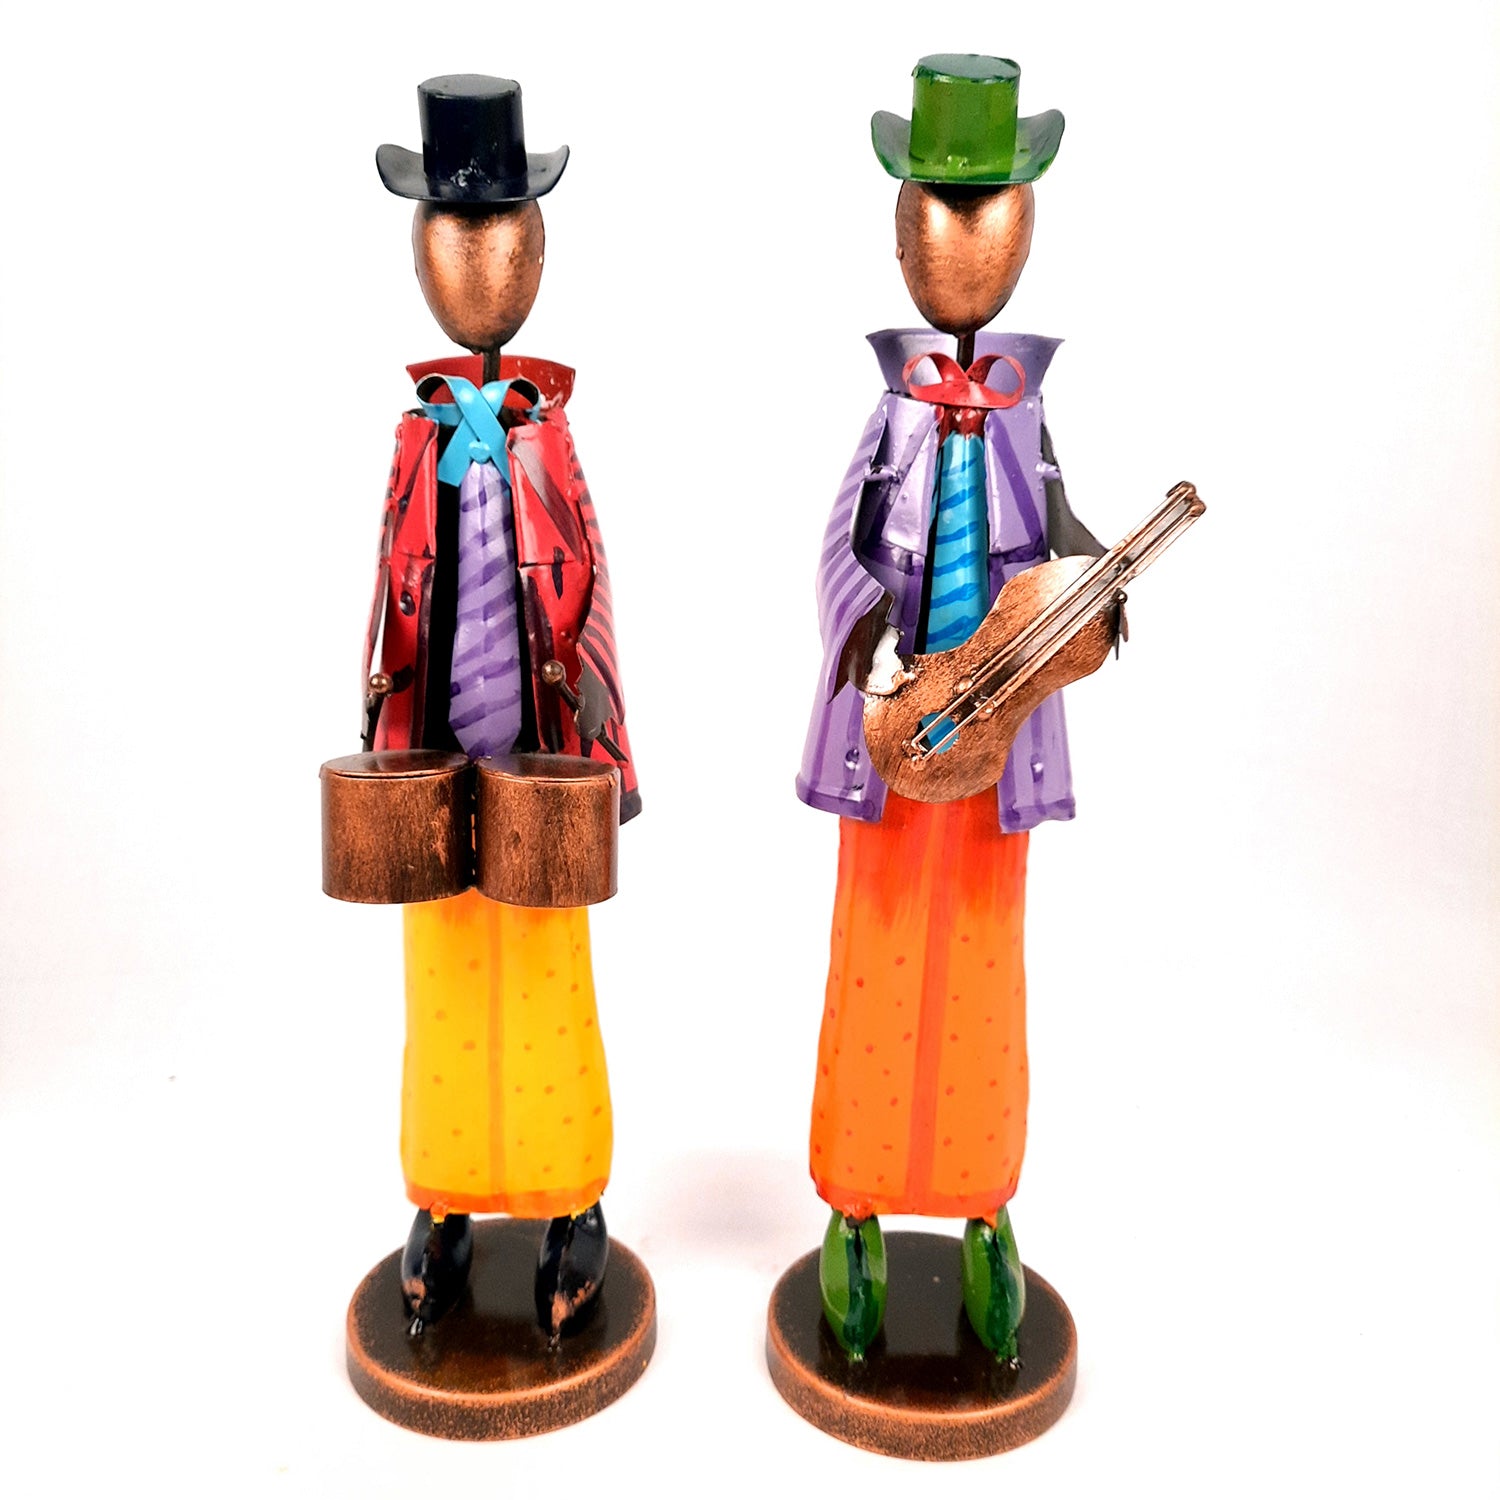 Showpiece Set - Retro Theme Musician Playing Musical Instruments | Decorative Big Figurines - For Home, Table, Living Room & TV Unit Decor & Gifts - 16 Inch (Set of 2) - Apkamart